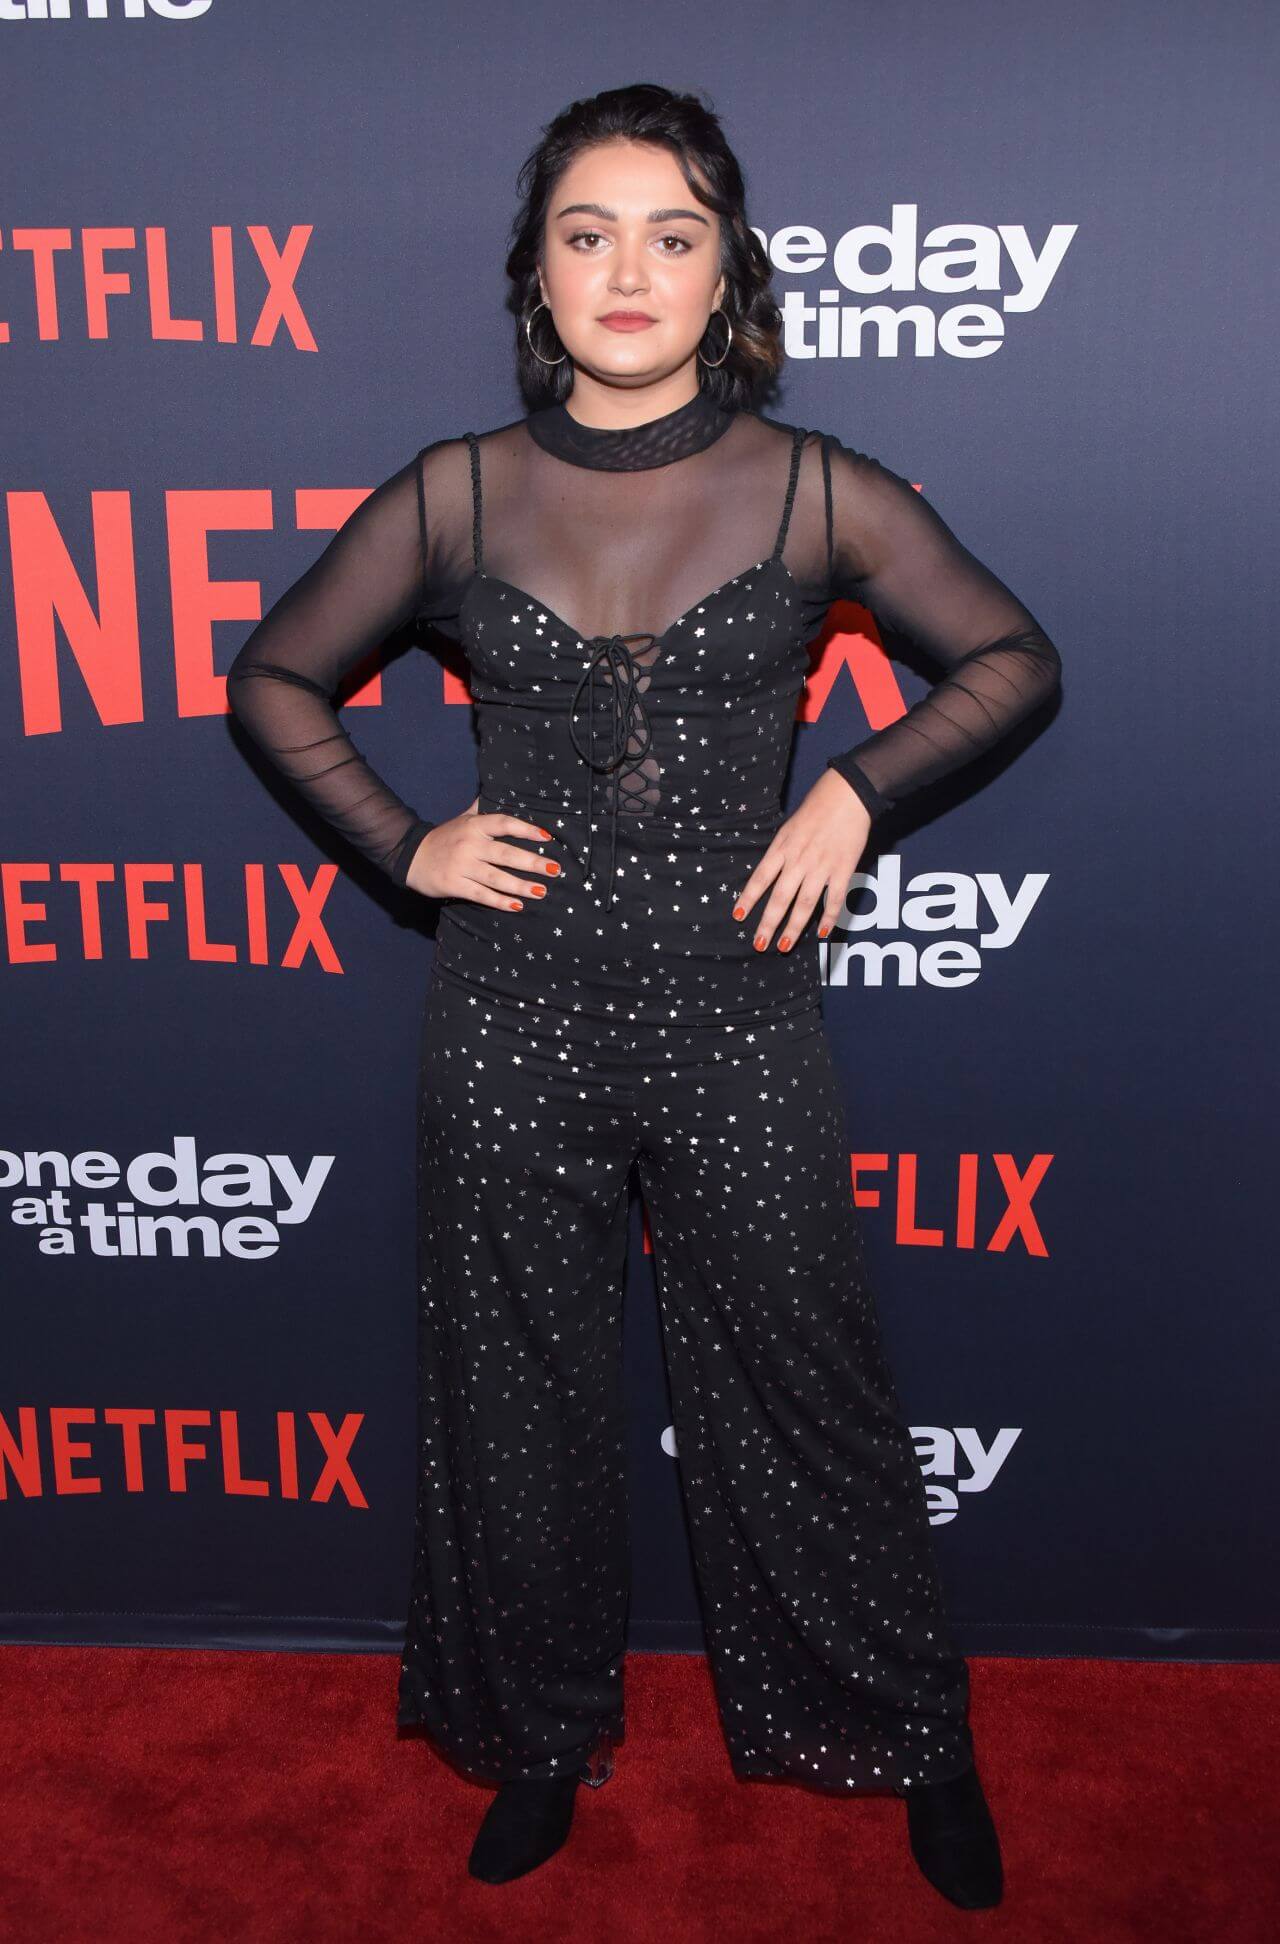 Ariela Barer In Black Sheering Full Sleeves Corset Jumpsuit At “One Day at a Time” TV Show Season 2 Premiere in Los Angeles